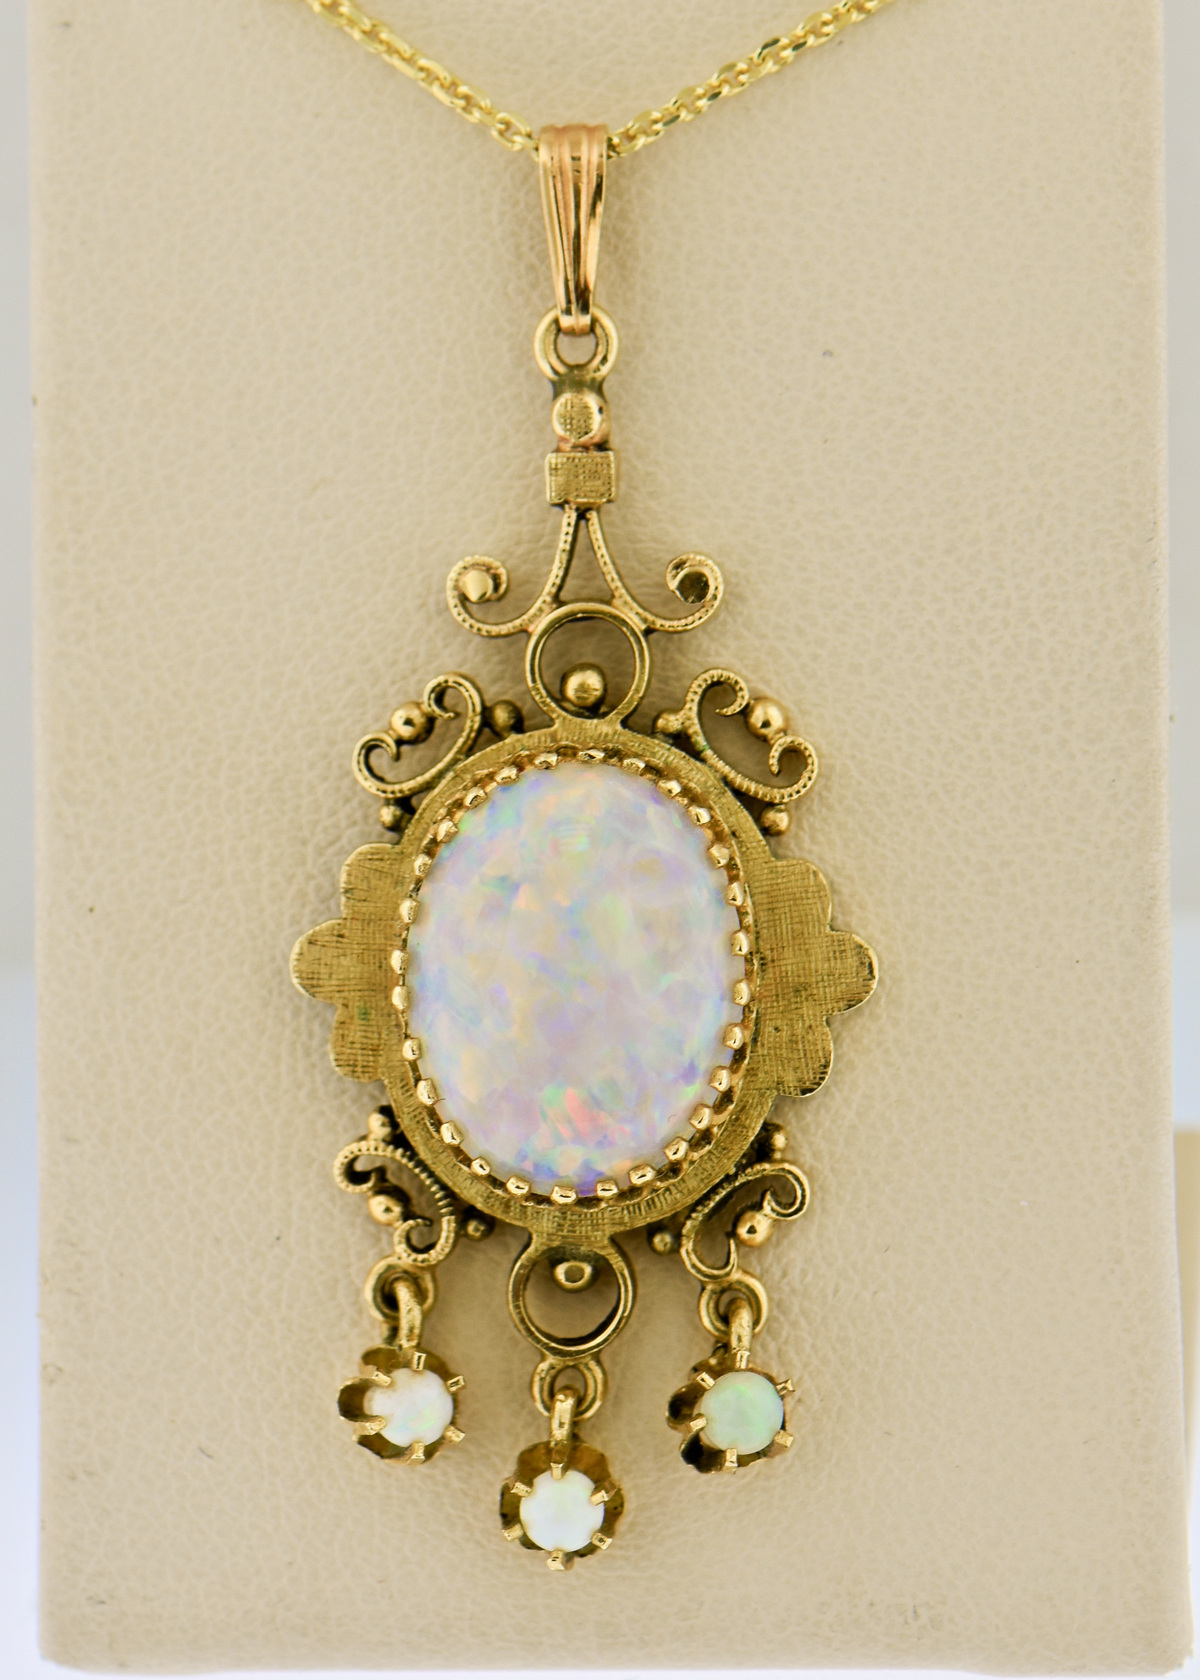 Buy Ornate Opal Cabochon Pendant, Vintage Opal Pendant, Large Opal Pendant,  Gemstone Pendant WLEY66-R Online in India - Etsy